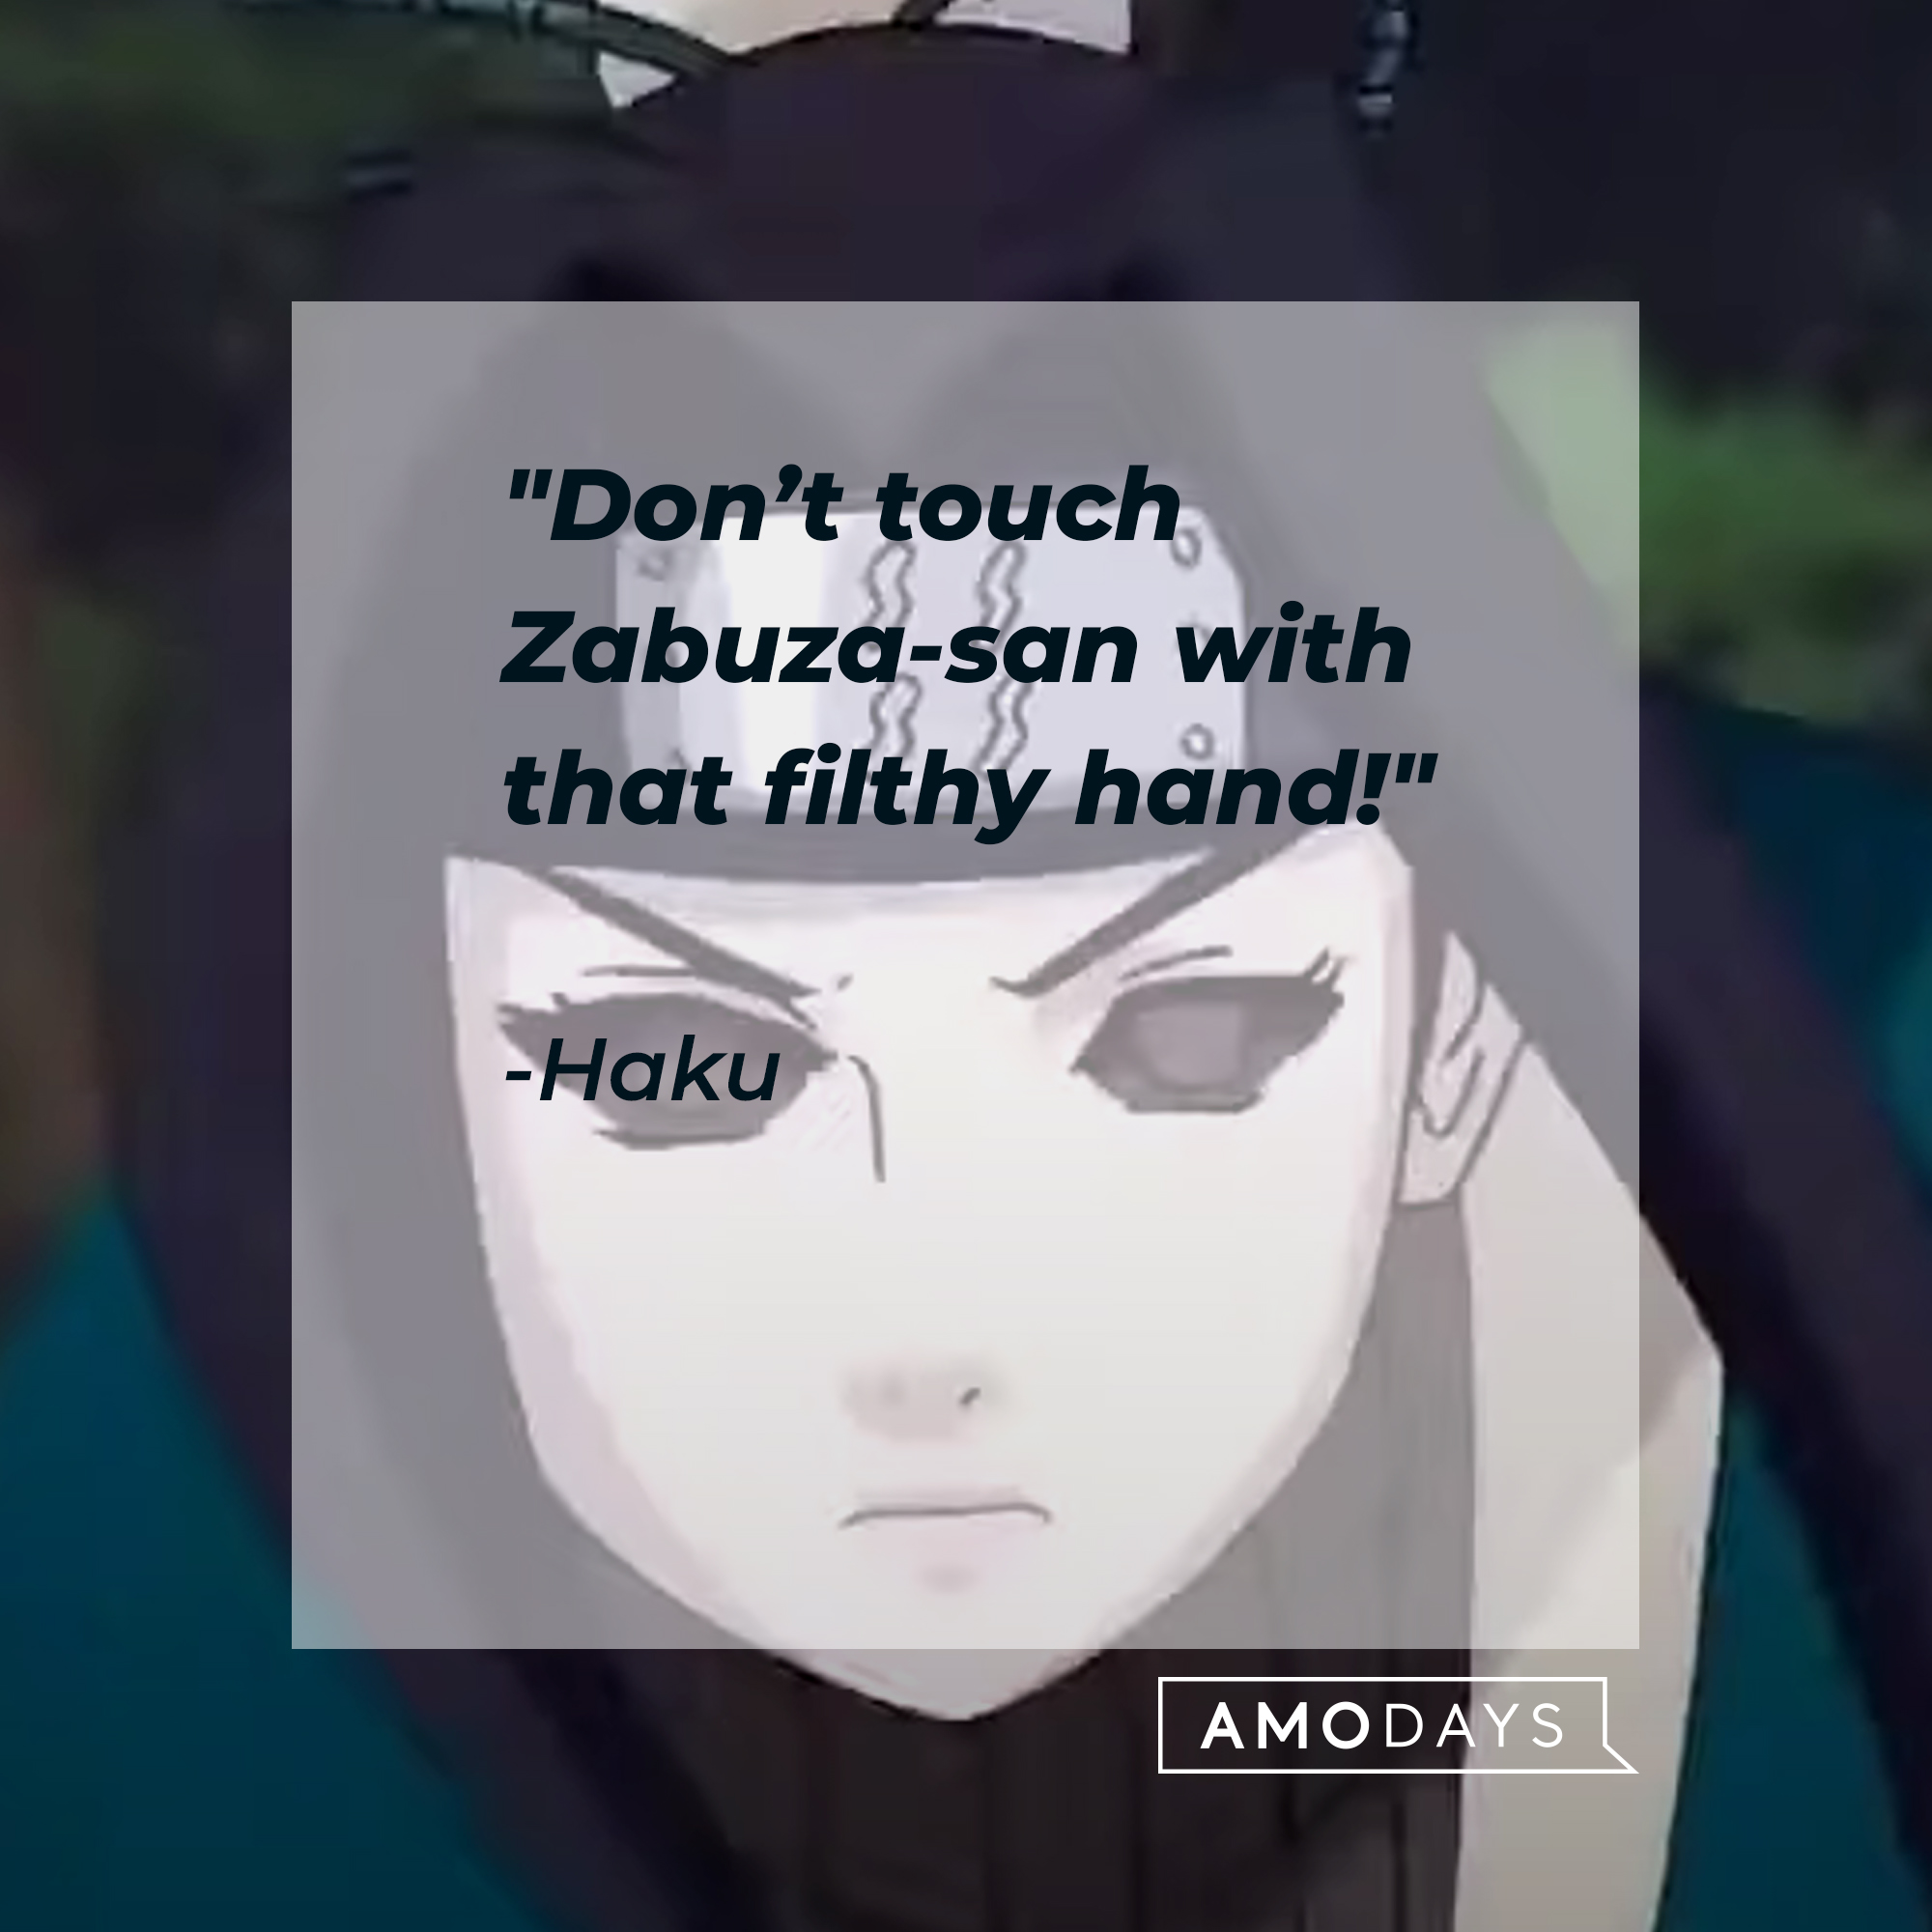 Haku, with his quote: “Don’t touch Zabuza-san with that filthy hand!” | Source: facebook.com/narutoofficialsns